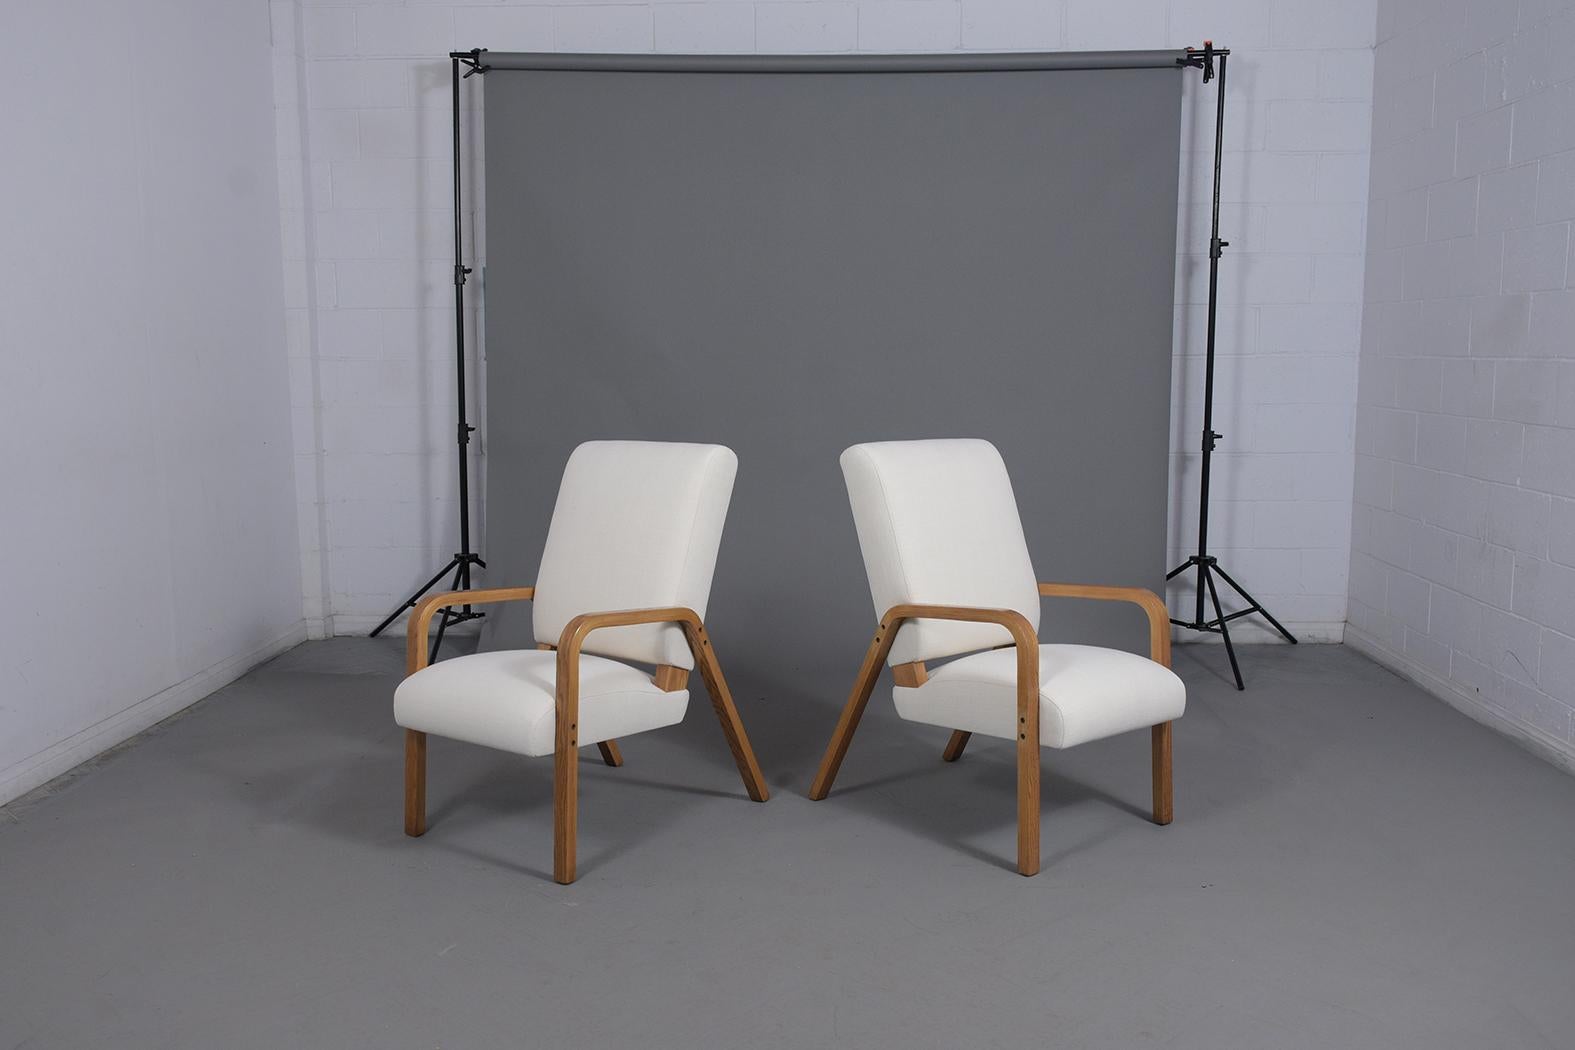 An extraordinary pair of Thonet bentwood lounge chairs are in great condition and fully restored by our team of craftsmen. The set has been professionally upholstered in a new white fabric with new foam inserts and the frames have been stained in a